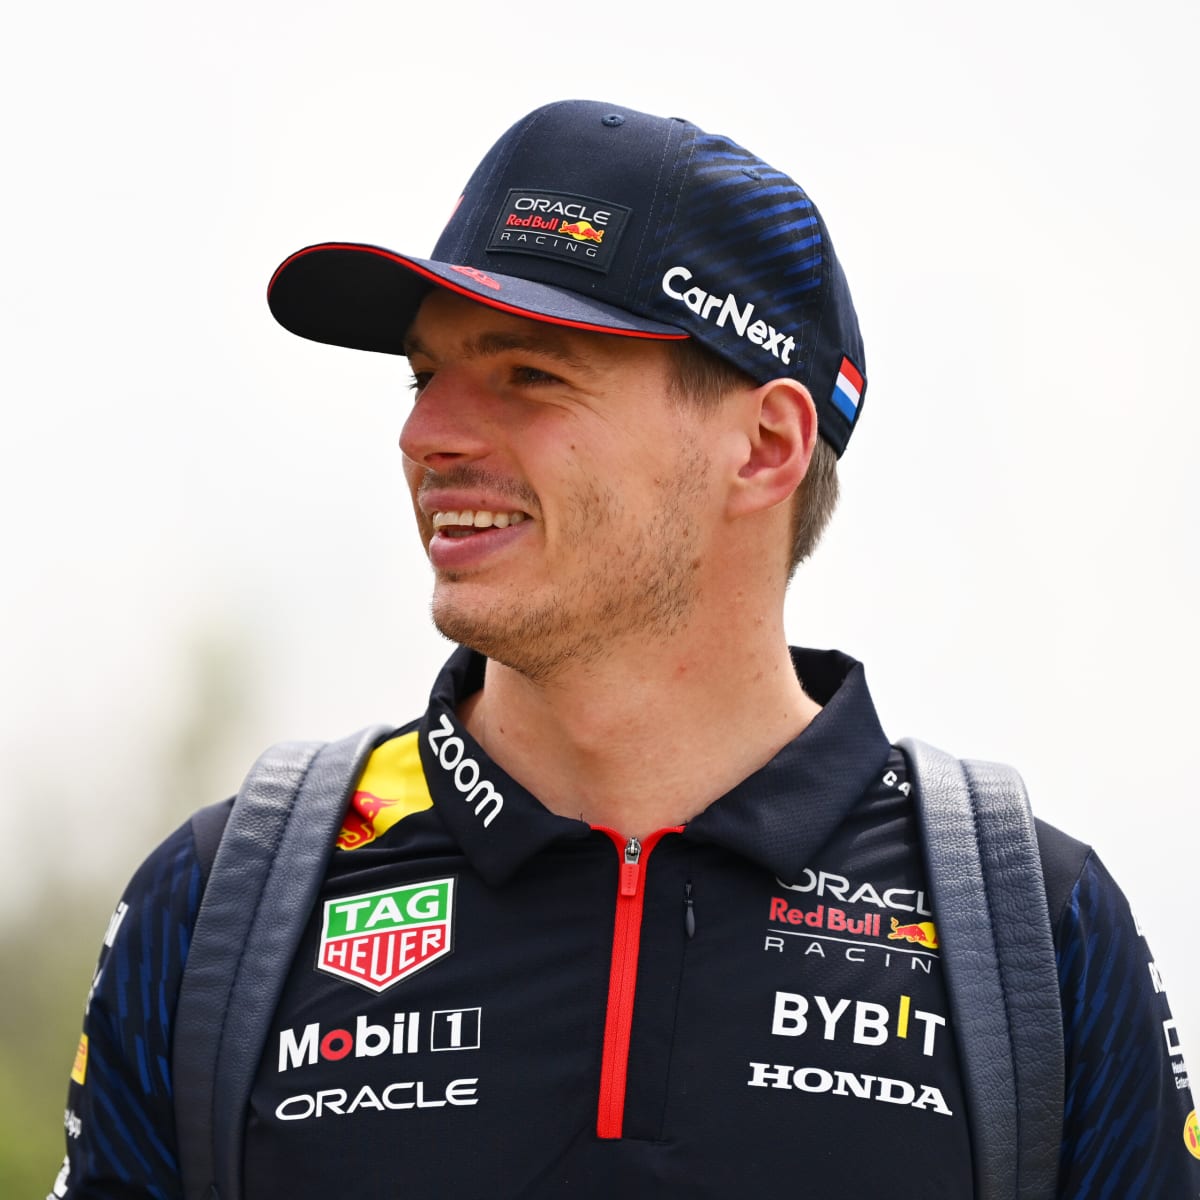 F1 starting grid: Max Verstappen claims pole in abbreviate